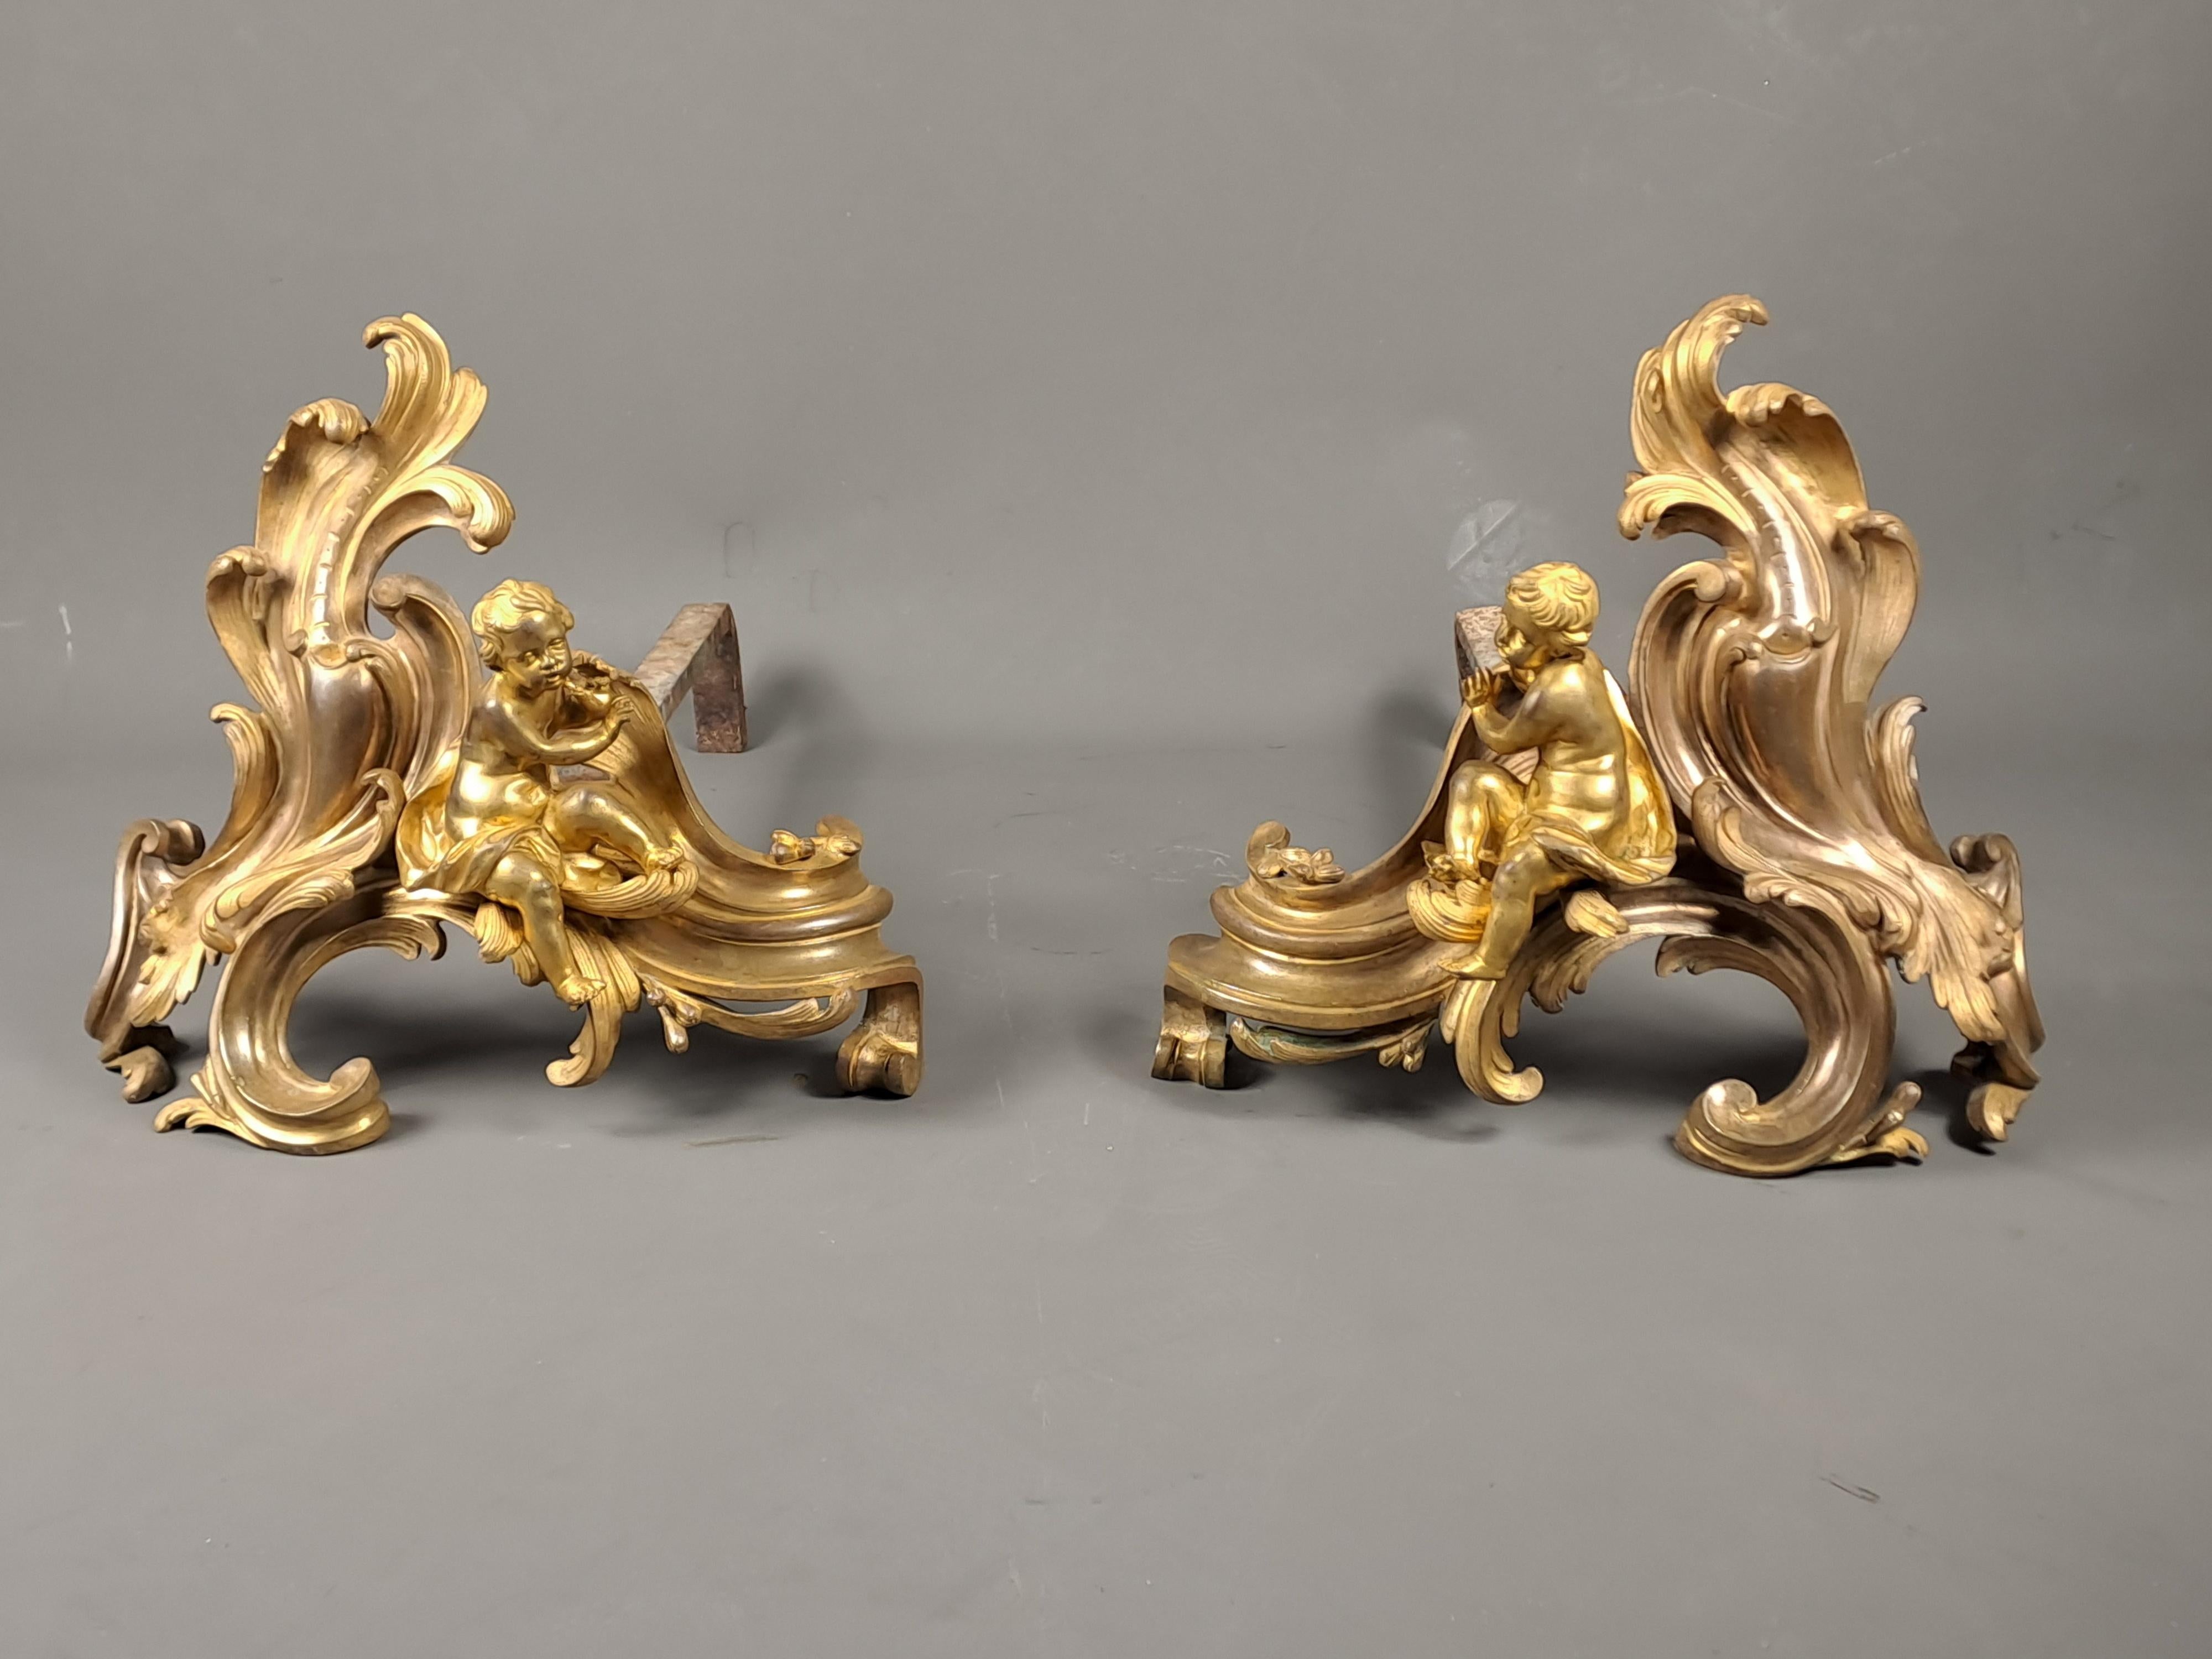 Pair of Louis XV andirons in finely chiseled gilded bronze decorated with chubby putti warming their hands, seated on a rococo decoration.

French work from the 18th century of good quality.

In good condition but wear to the gilding